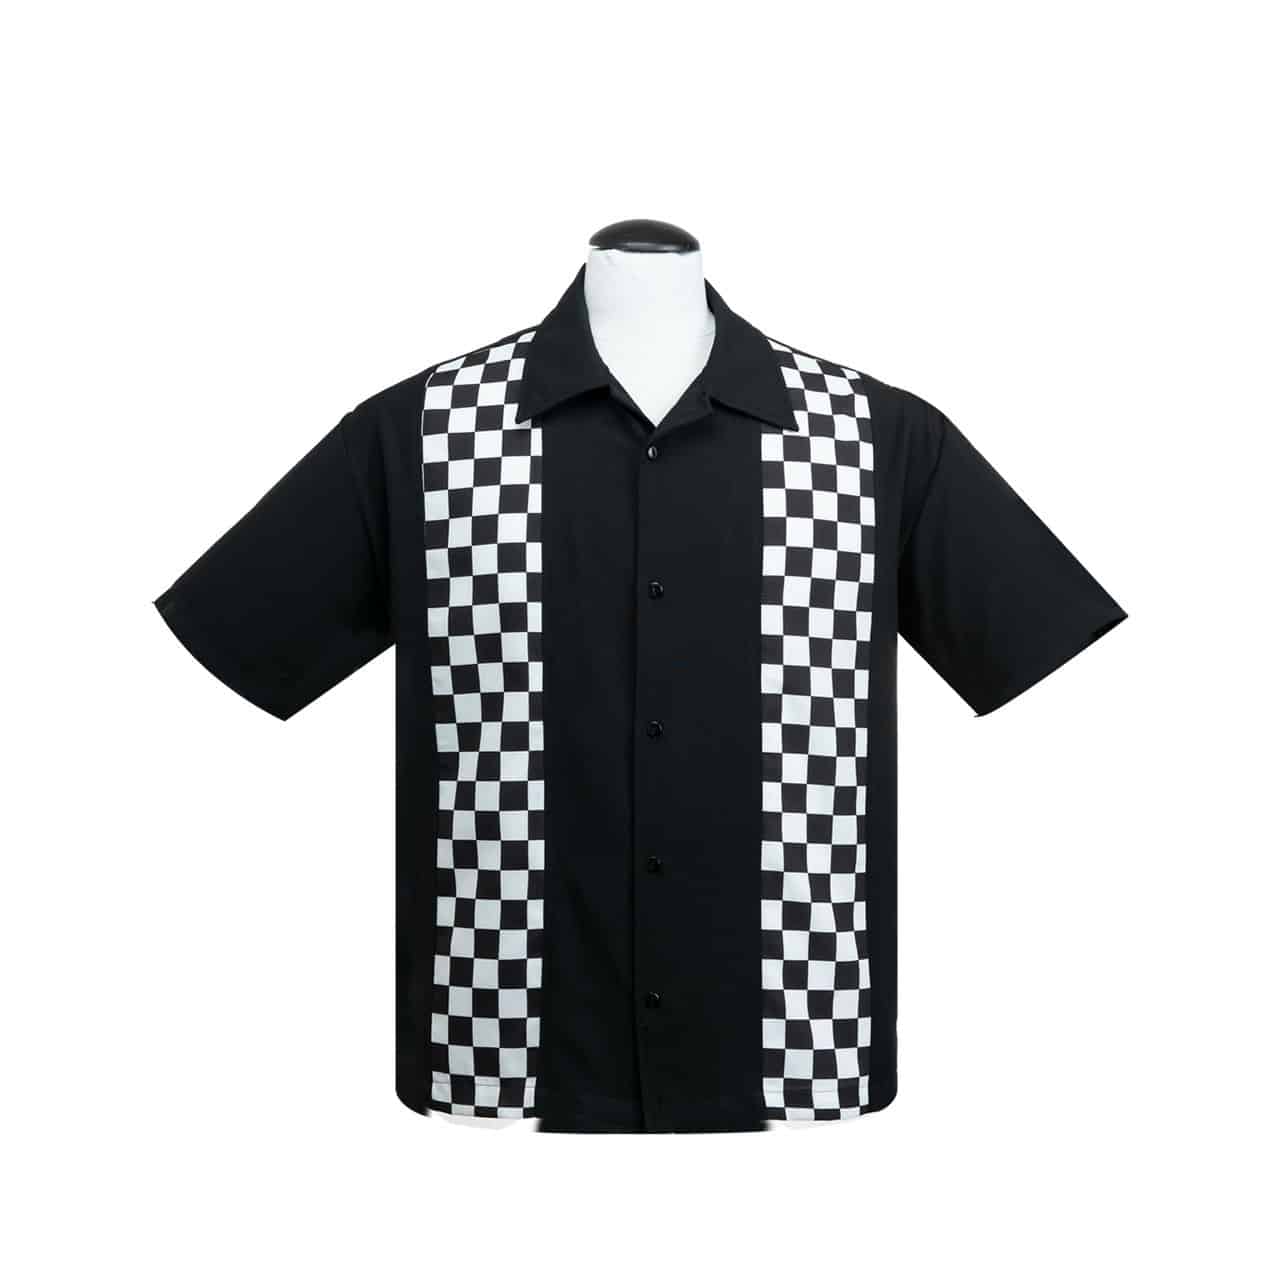 Checkered Panels Bowling Shirt by Steady Clothing